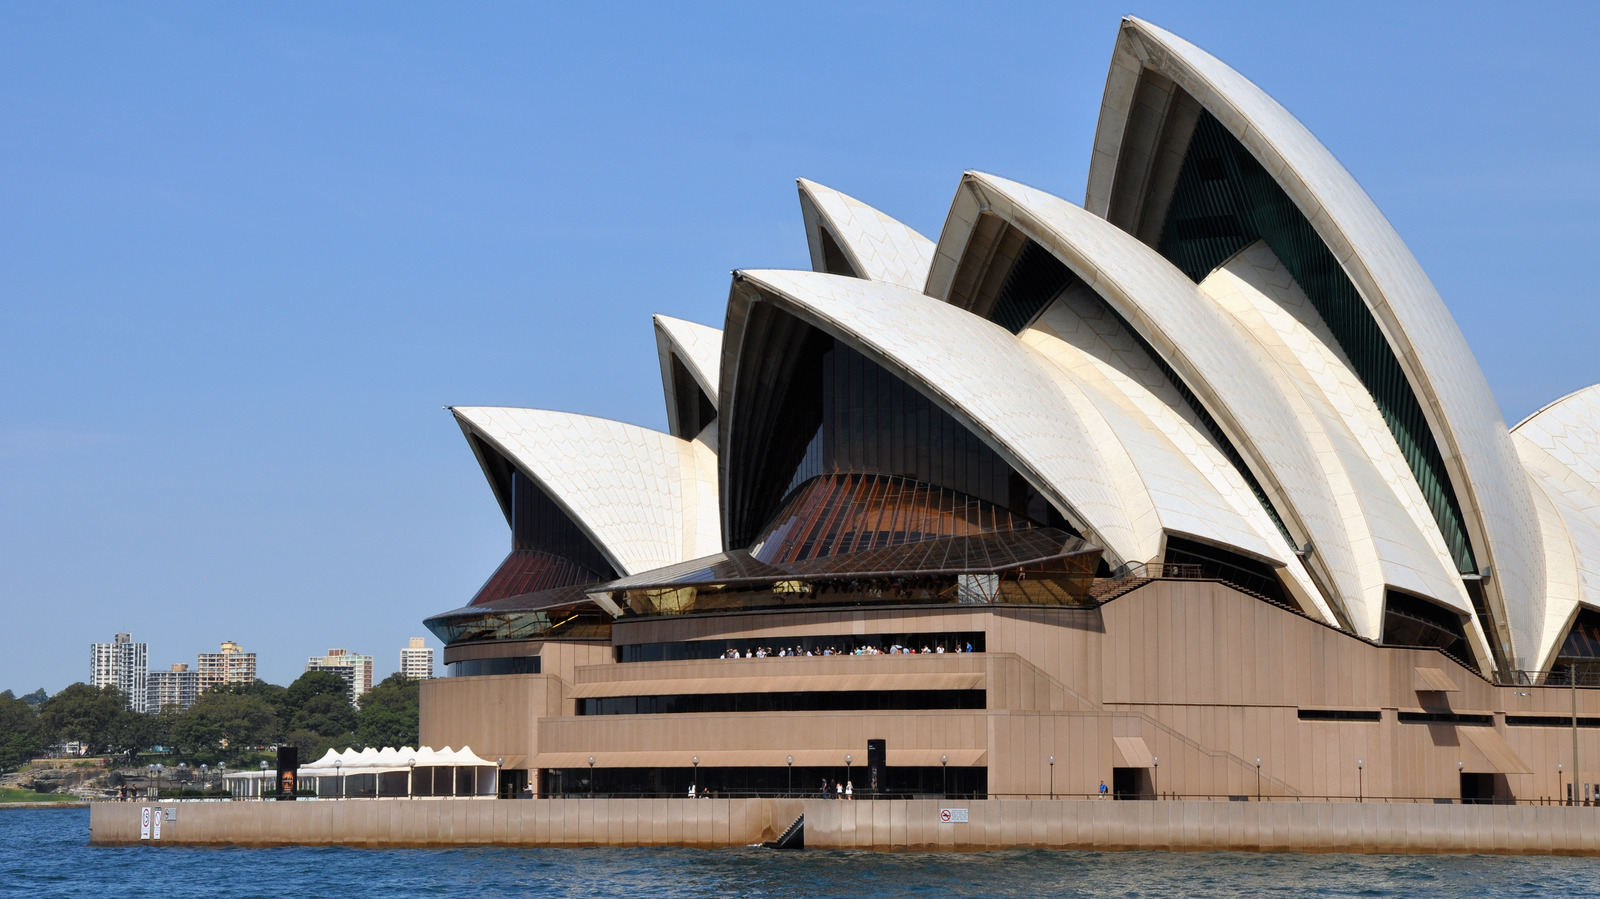 https://www.housedigest.com/img/gallery/the-untold-truth-of-the-sydney-opera-house/l-intro-1655994483.jpg